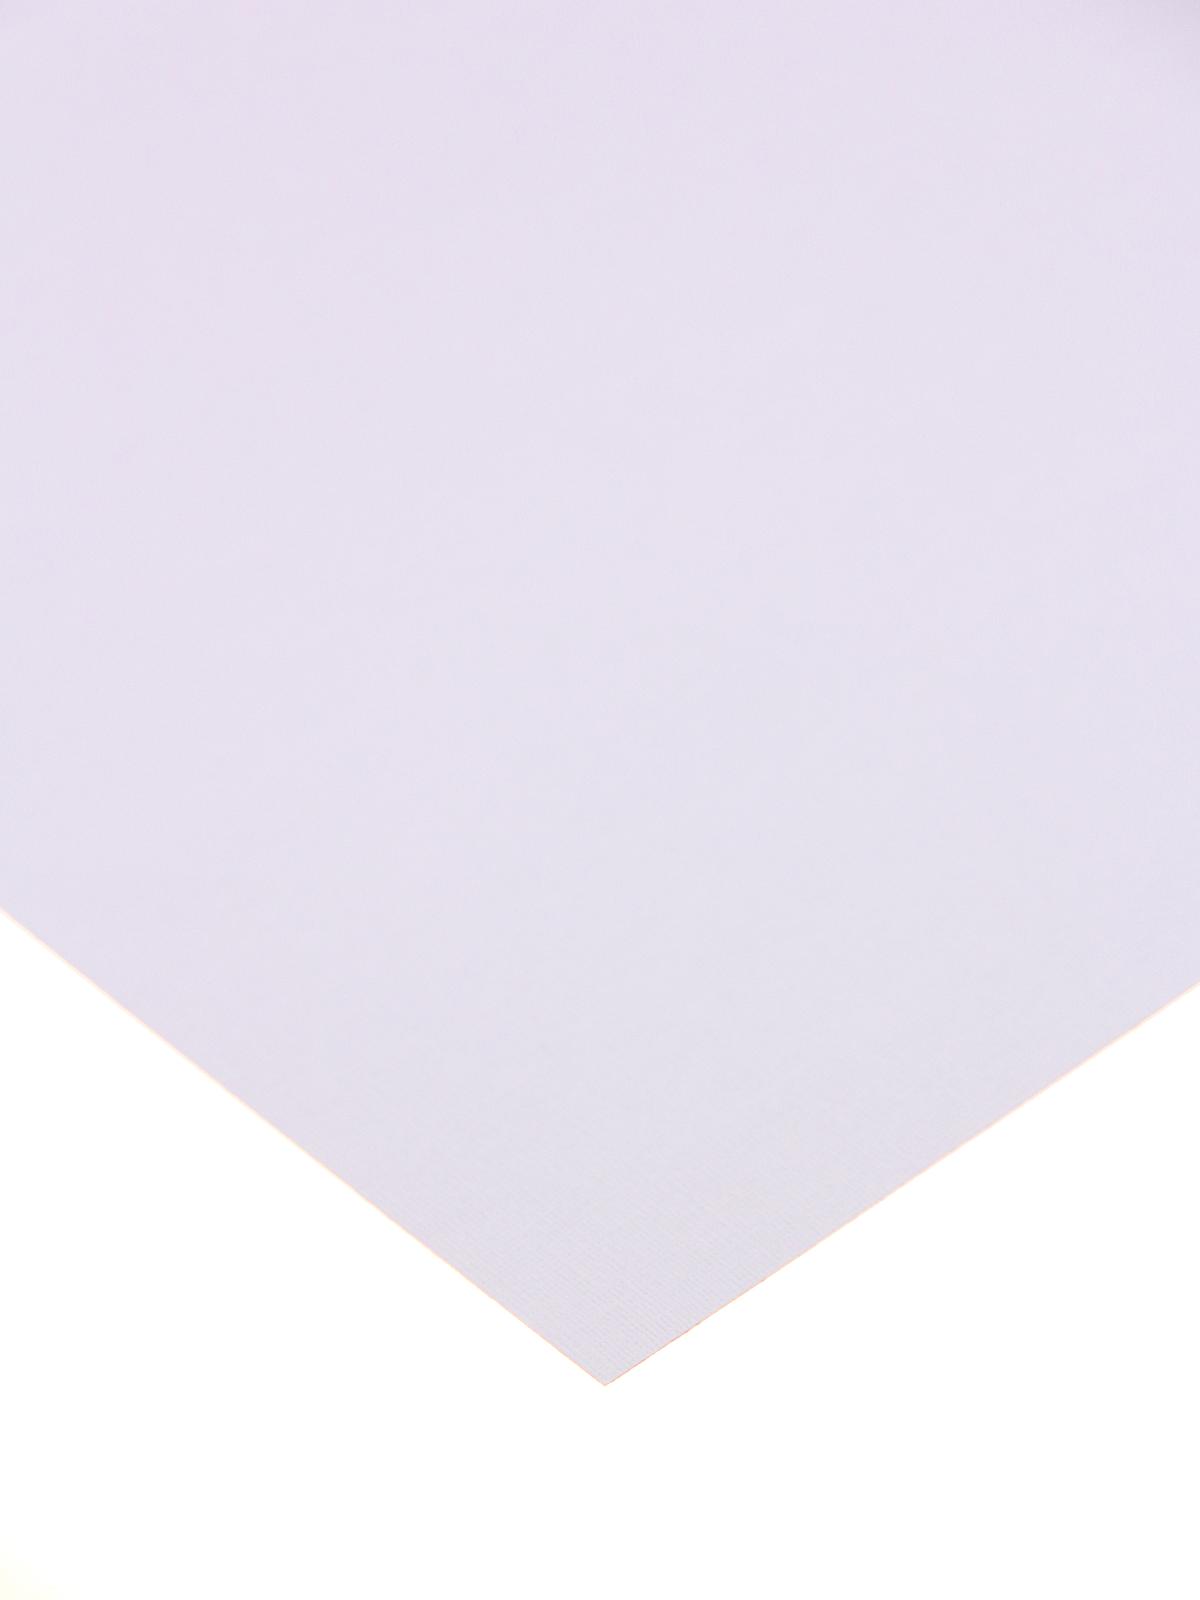 80 Lb. Canvas 12 In. X 12 In. Sheet Lilac Mist